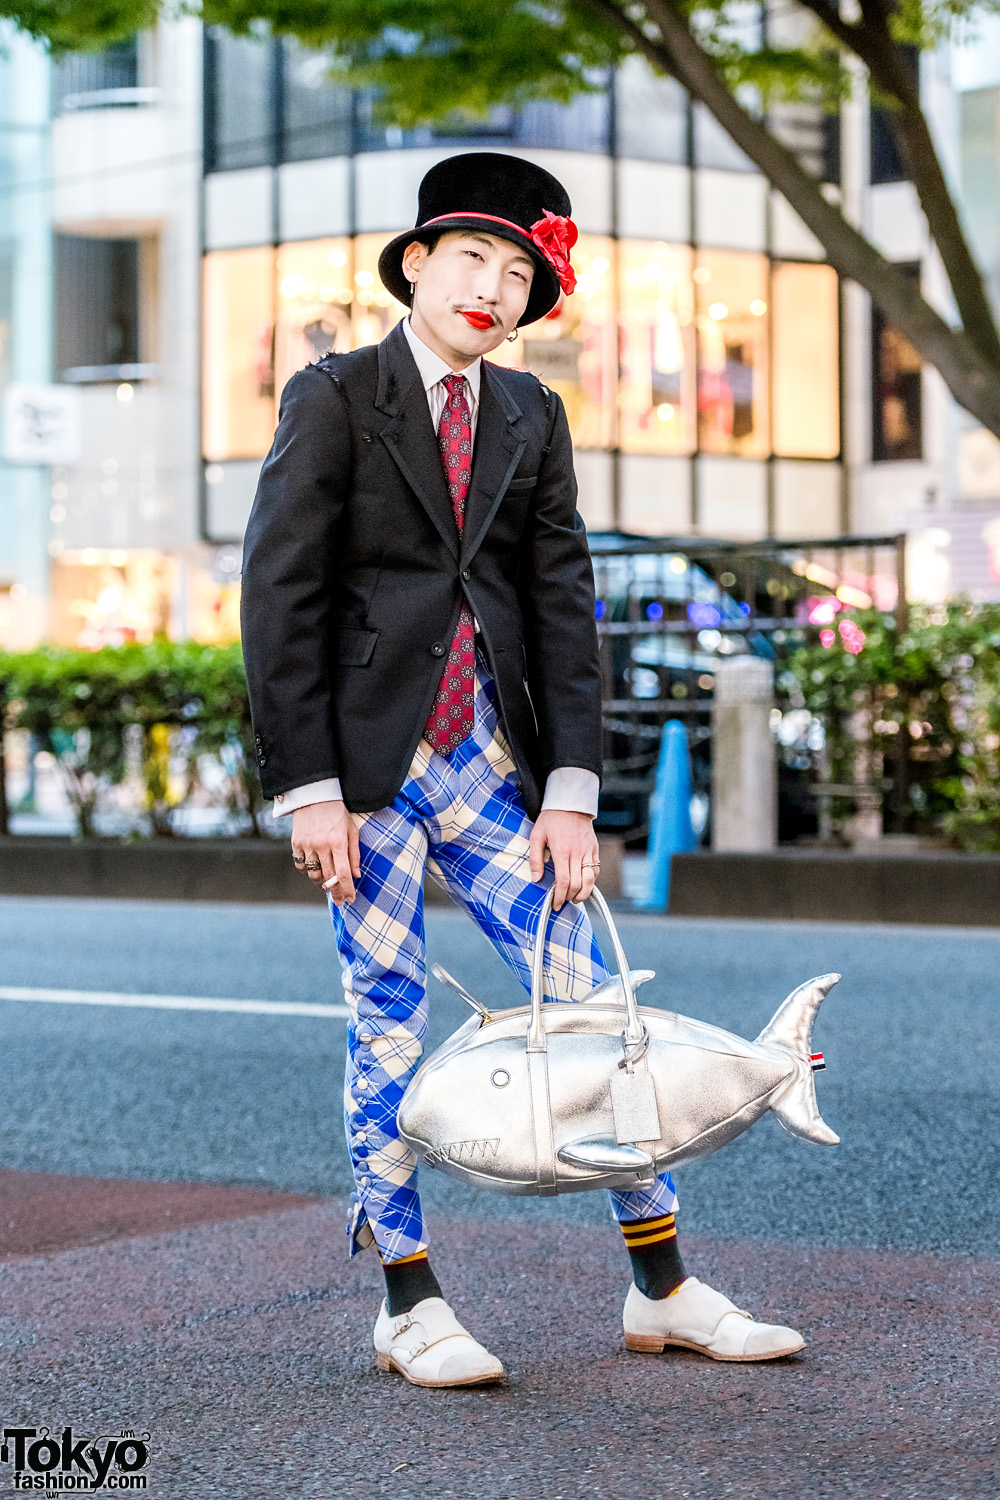 Japanese Street Style w/ Thom Browne, Hilditch & Key, Cheaney And Sons, Charles Jeffrey, Top Hat & Shark Bag